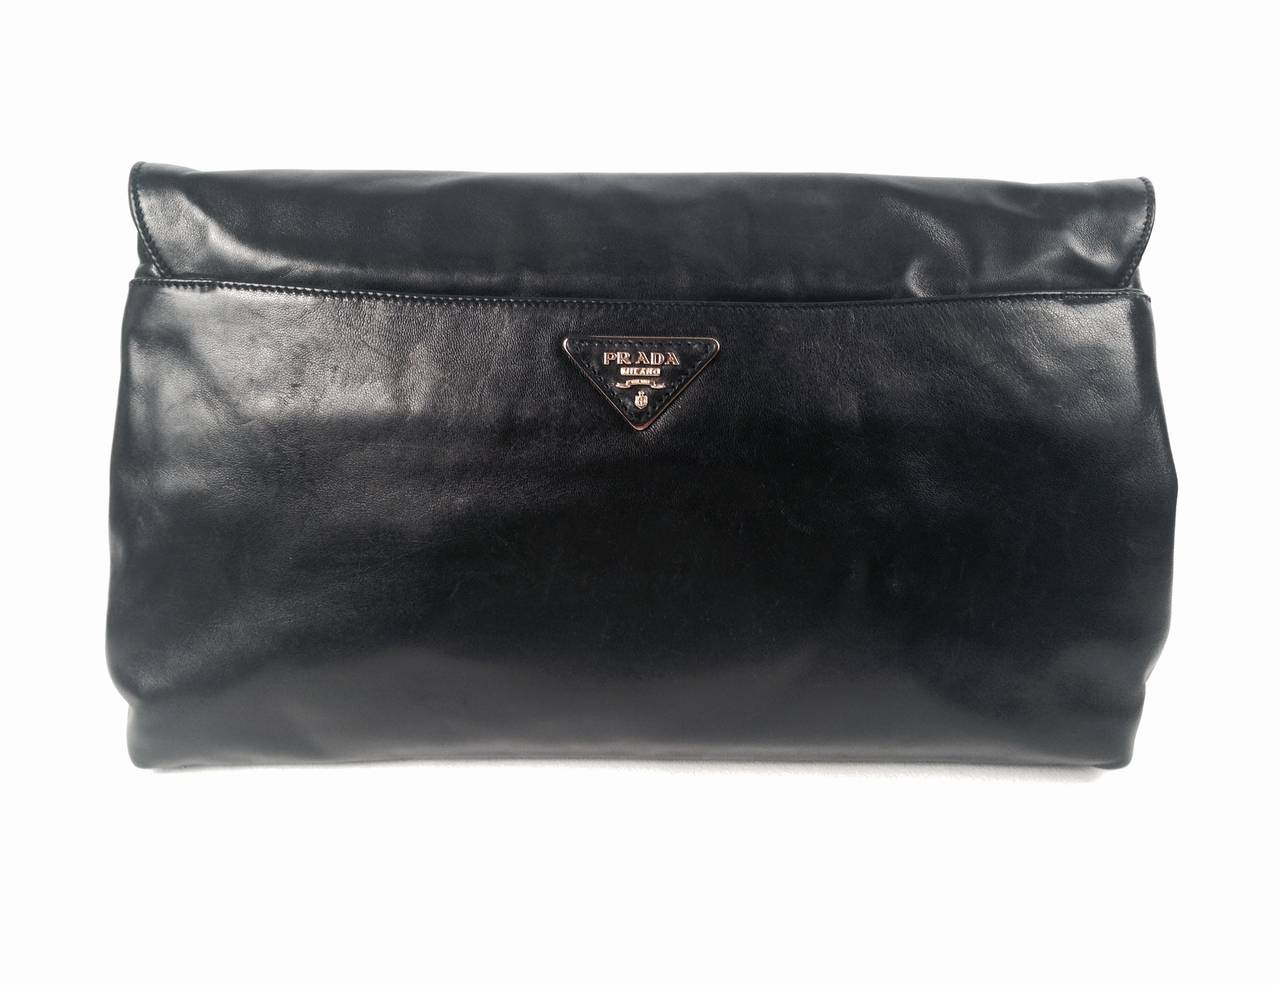 Prada Nappa Leather Smoking Lips Clutch has become a highly desired collectible since Miuccia Prada introduced it in 2012.  Features include soft, supple leather and polished gold tone hardware.  The piece de resistance?  A showstopping cigarette